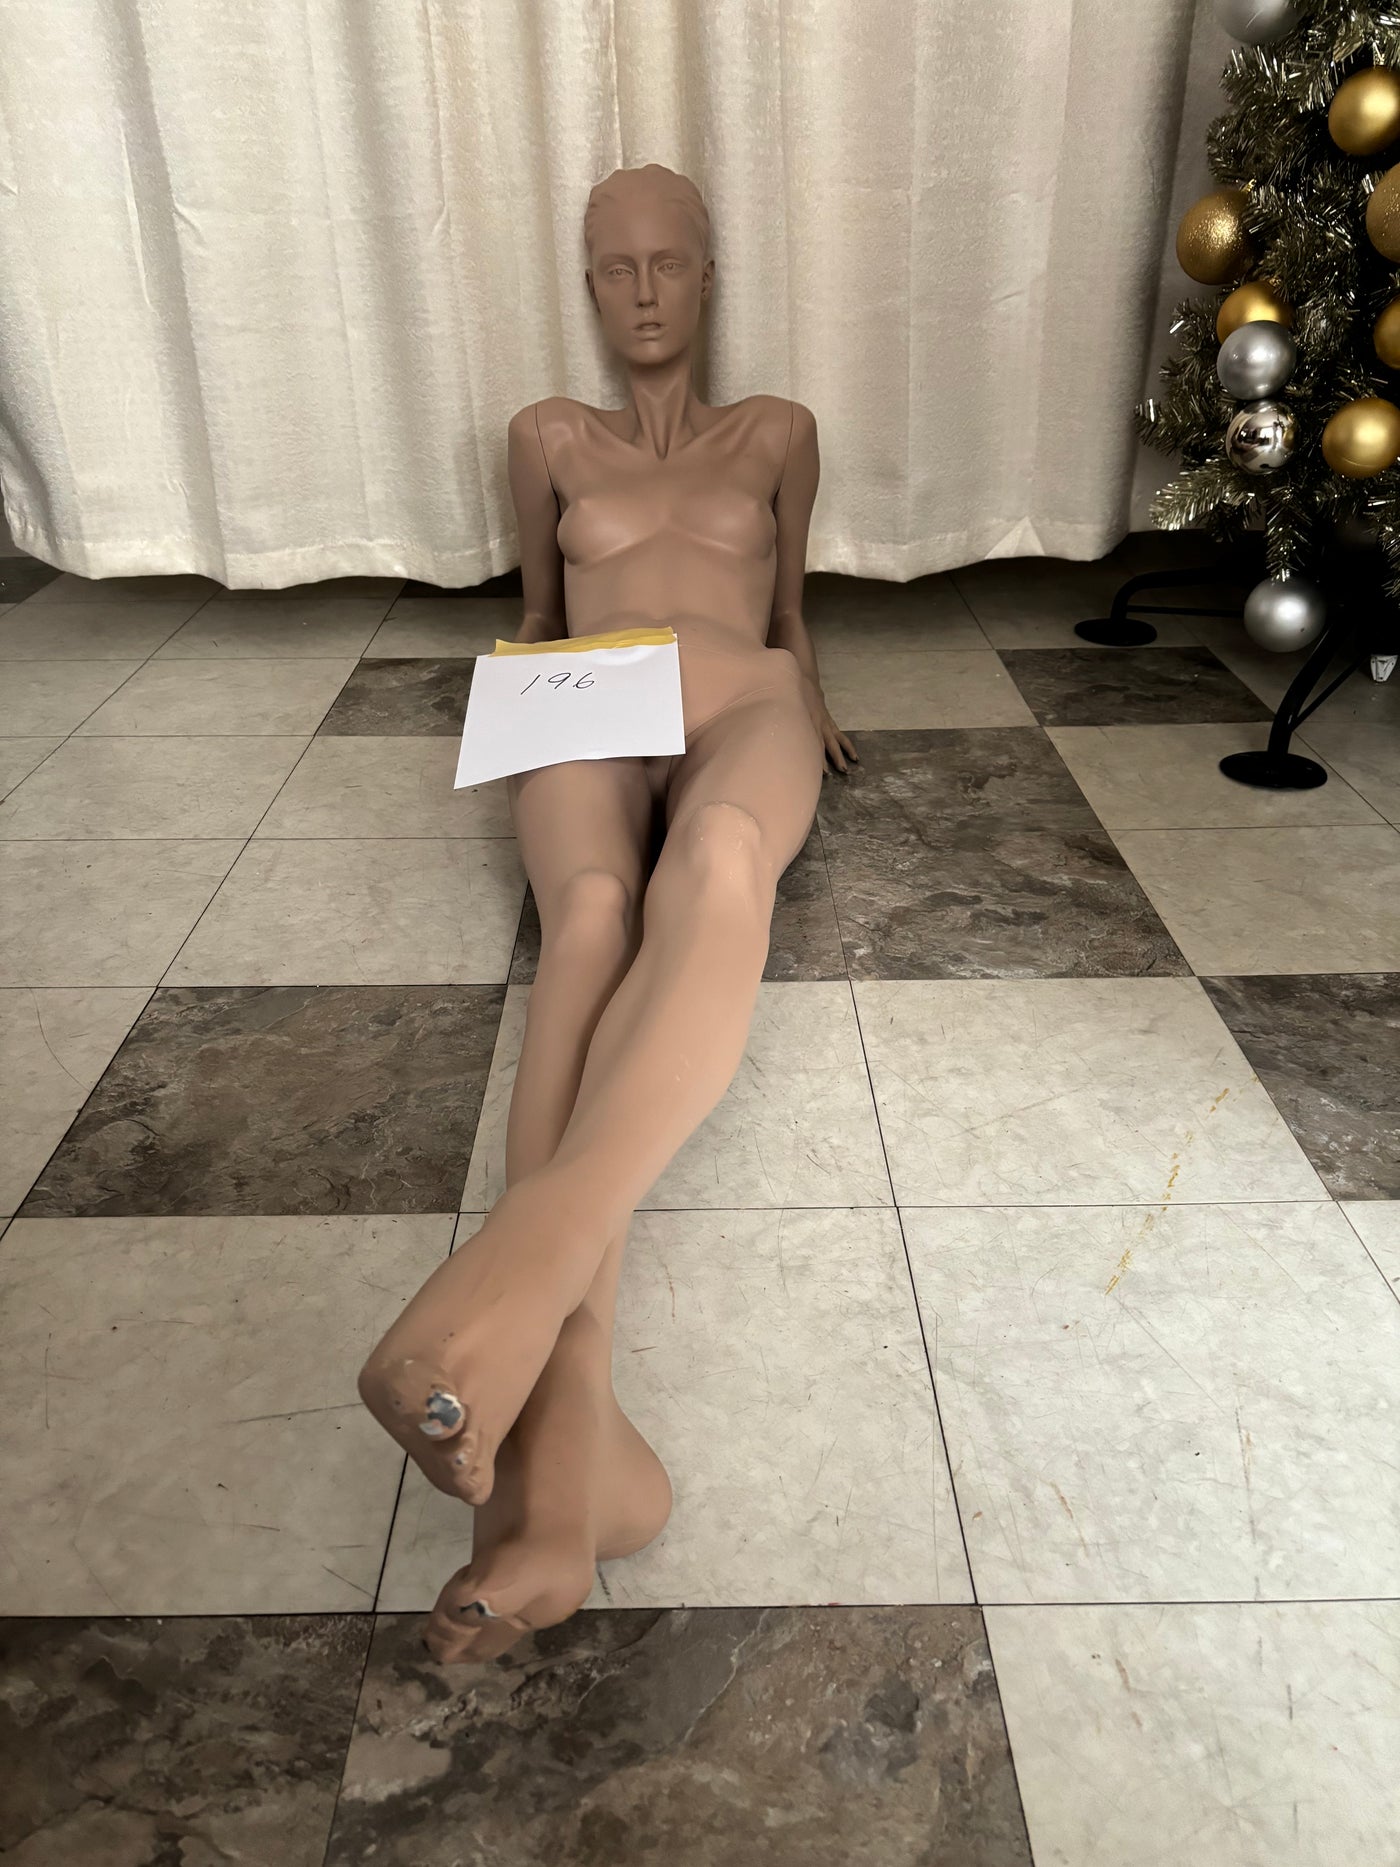 Used Rootstein Adel Reclining Female Mannequin #196 - Classy Lady Long Legs